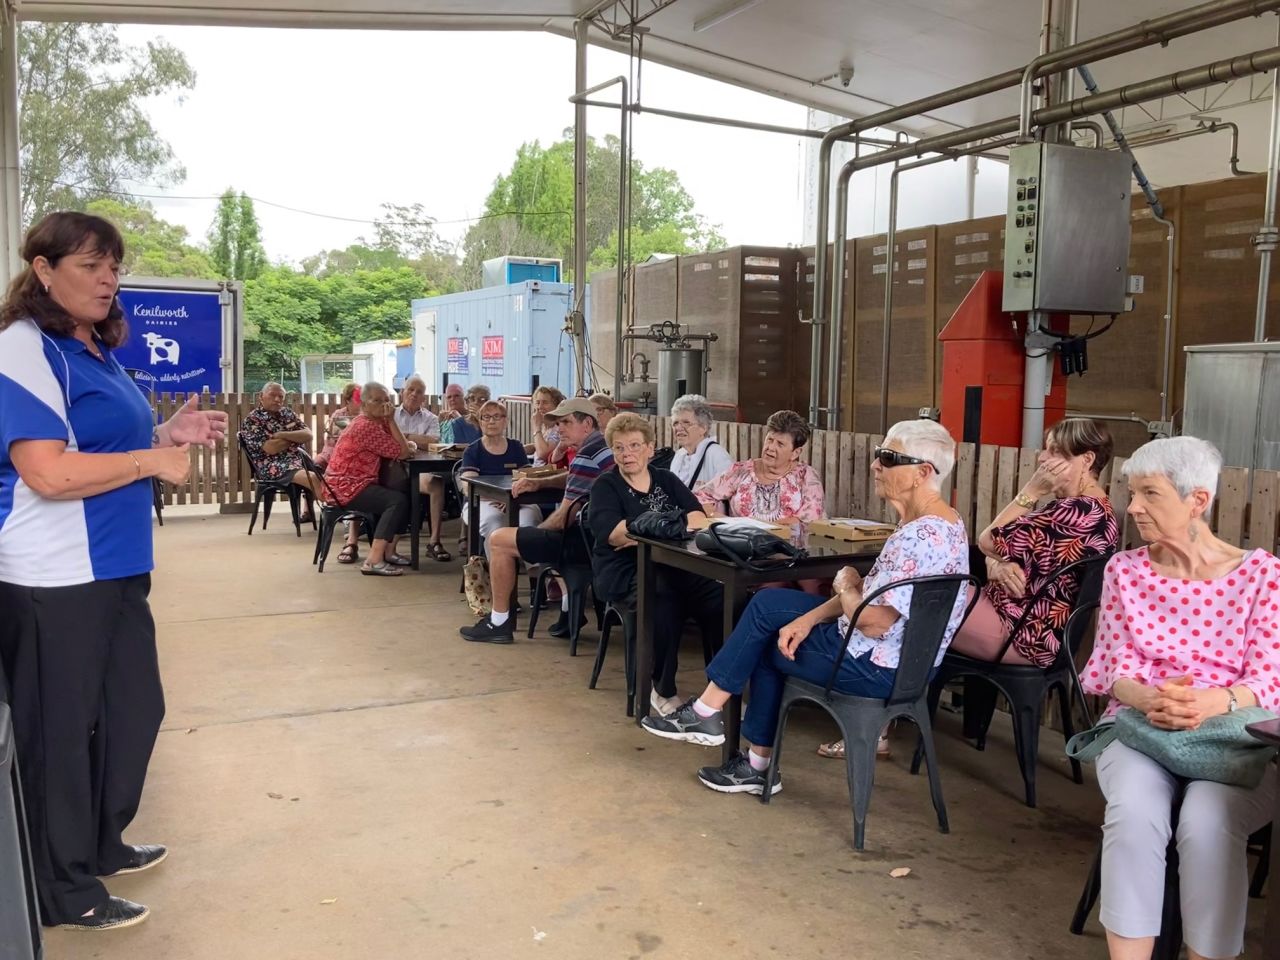 Members and guests enjoyed an informative talk during a visit to the Kenilworth Dairies during the 2021 December Christmas bus trip